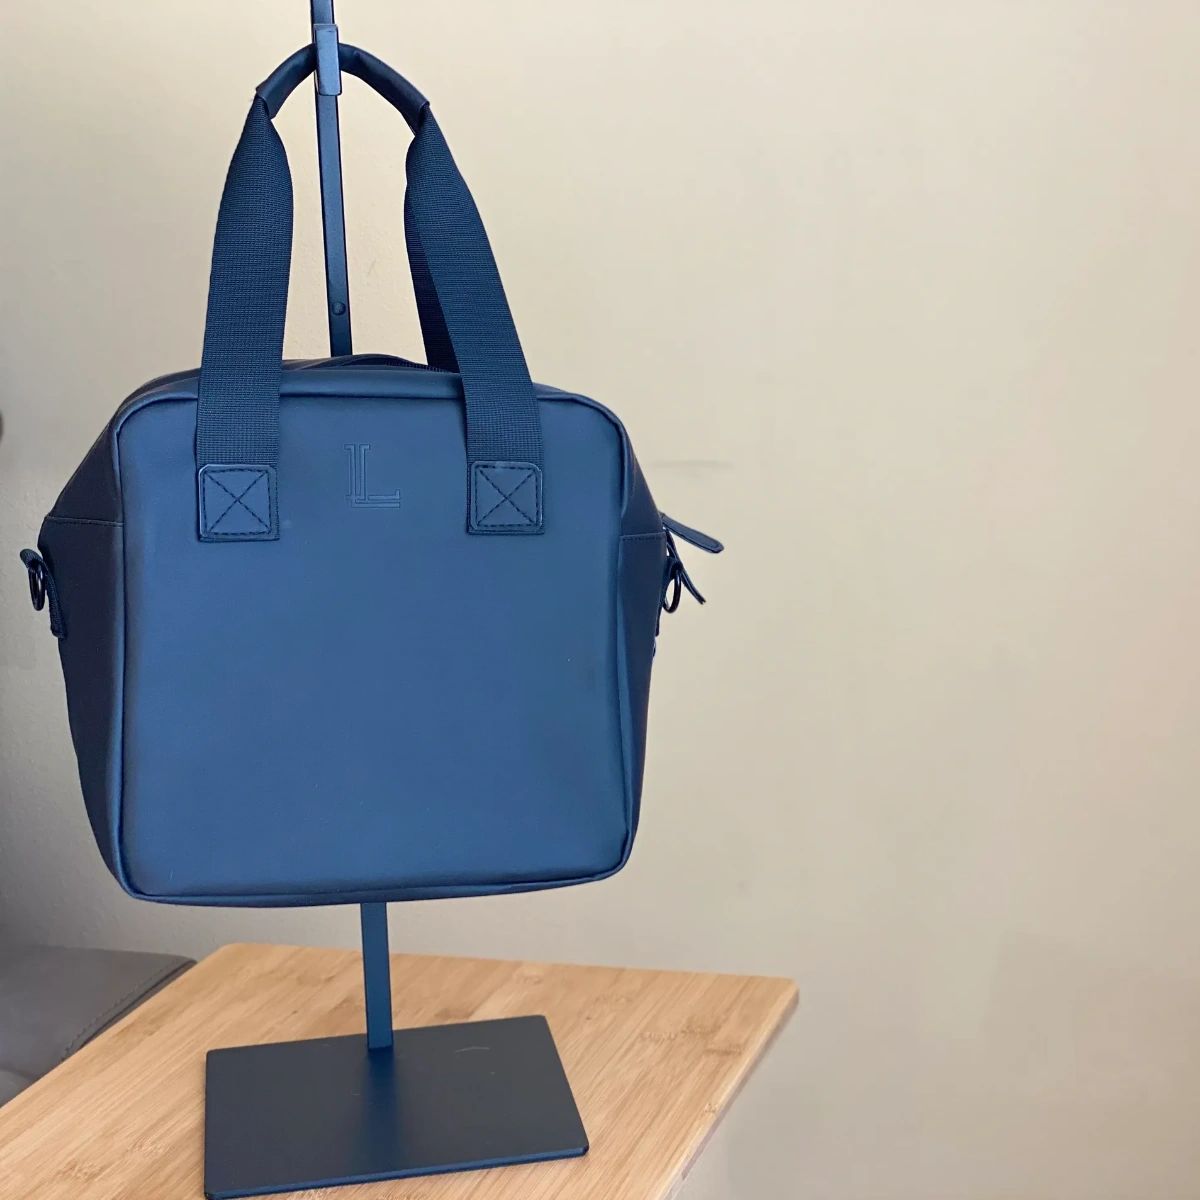 Have you tried our vegan leather lunch bags? We'd love to hear your feedback! Leave a review online and let us know what you think. #Leonore #VeganLeather #LunchBag #VeganLeatherBags #InsulatedBag